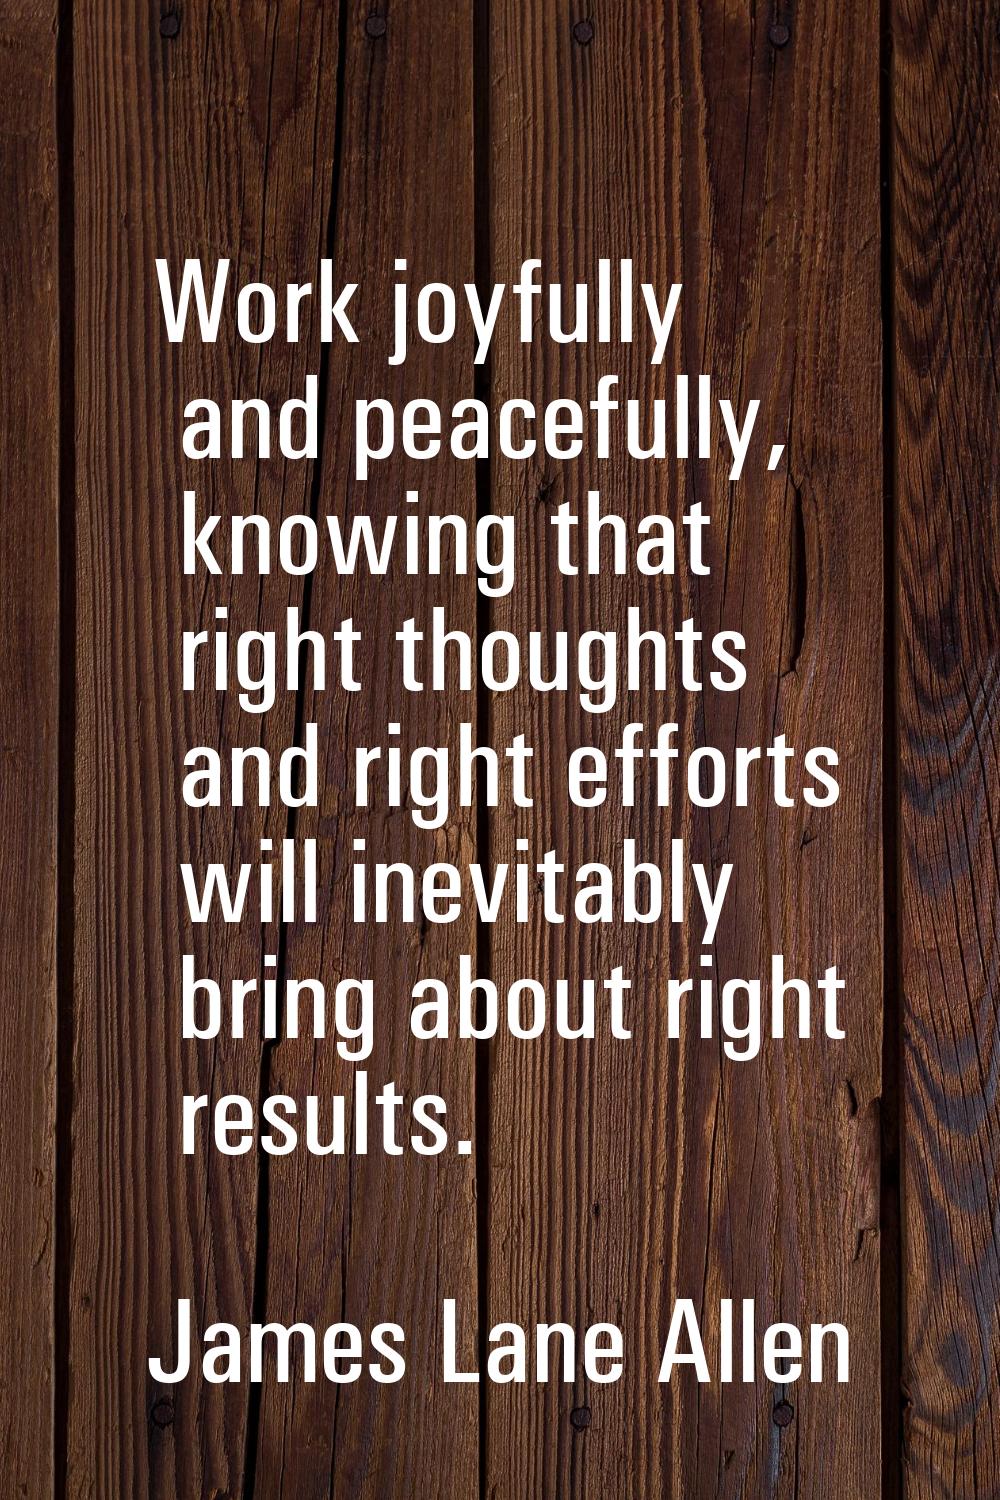 Work joyfully and peacefully, knowing that right thoughts and right efforts will inevitably bring a